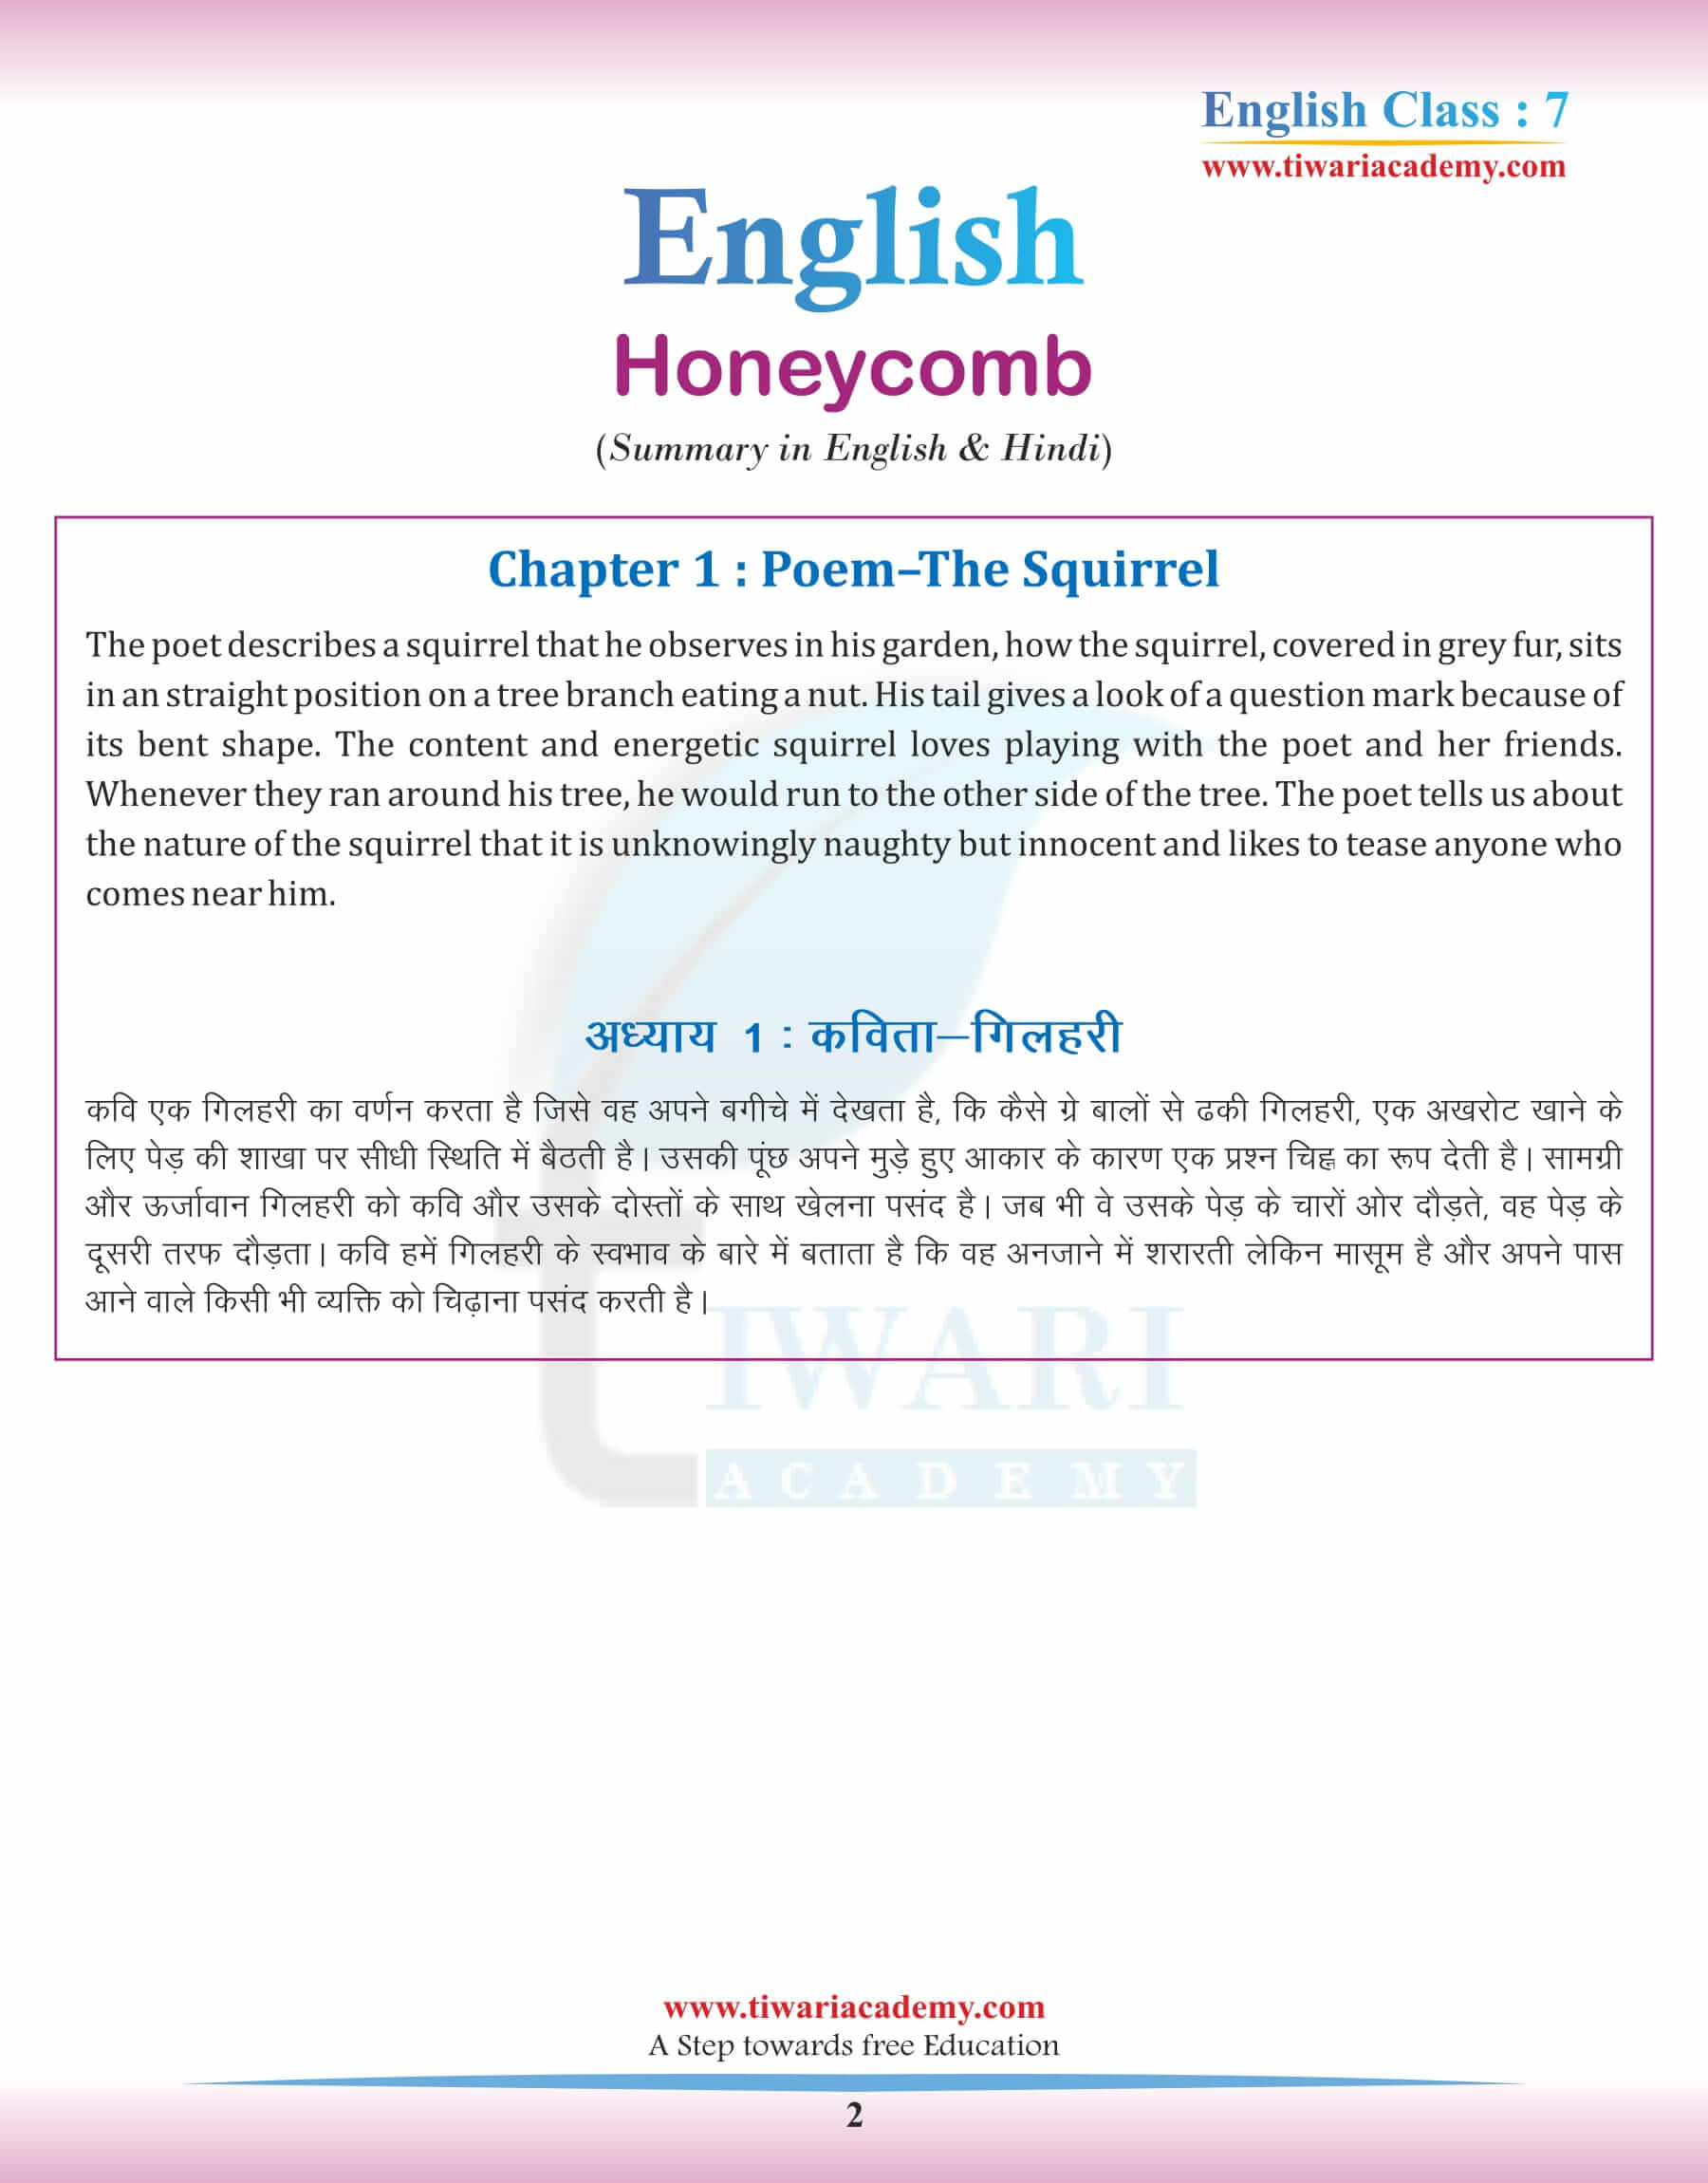 Class 7 English Chapter 1 Poem Summary in Hindi and English